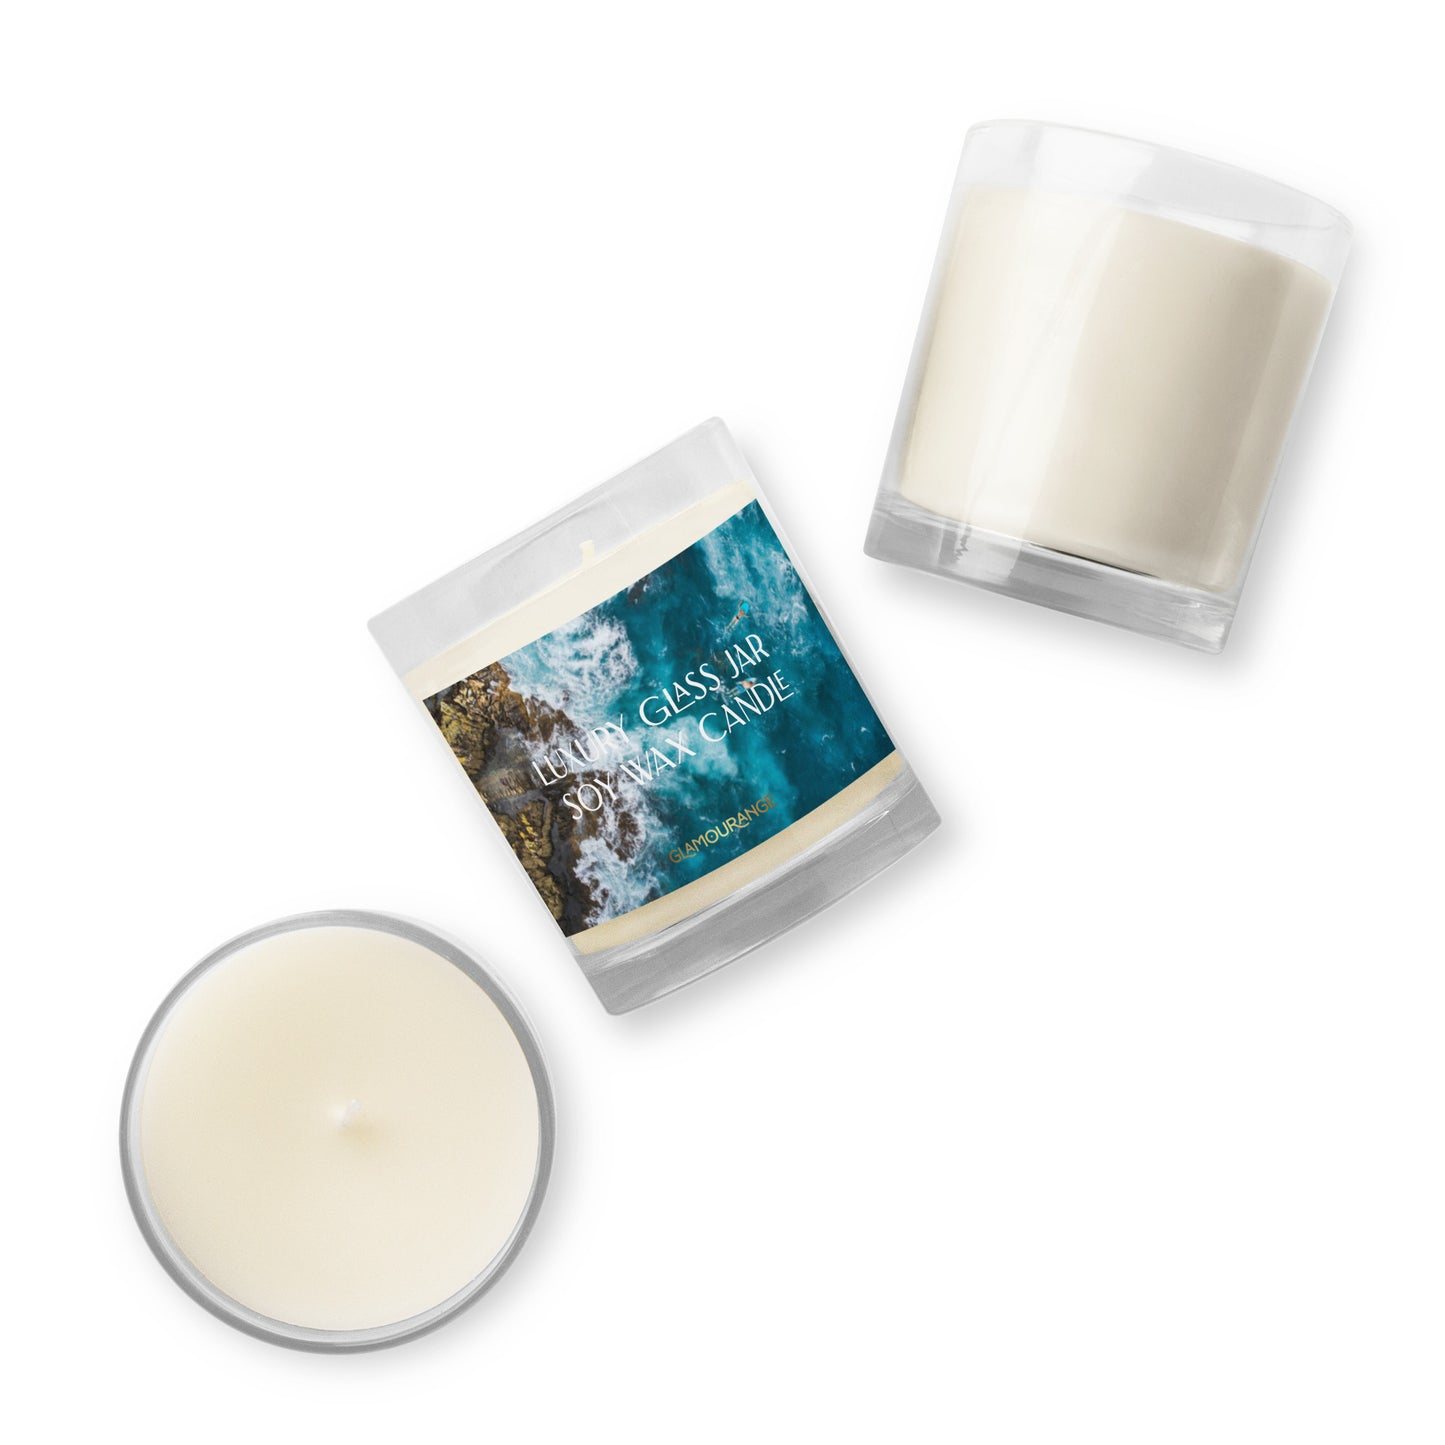 Glass Jar Soy Wax Candle (Scenic Ocean Life - Nature Label 0032)